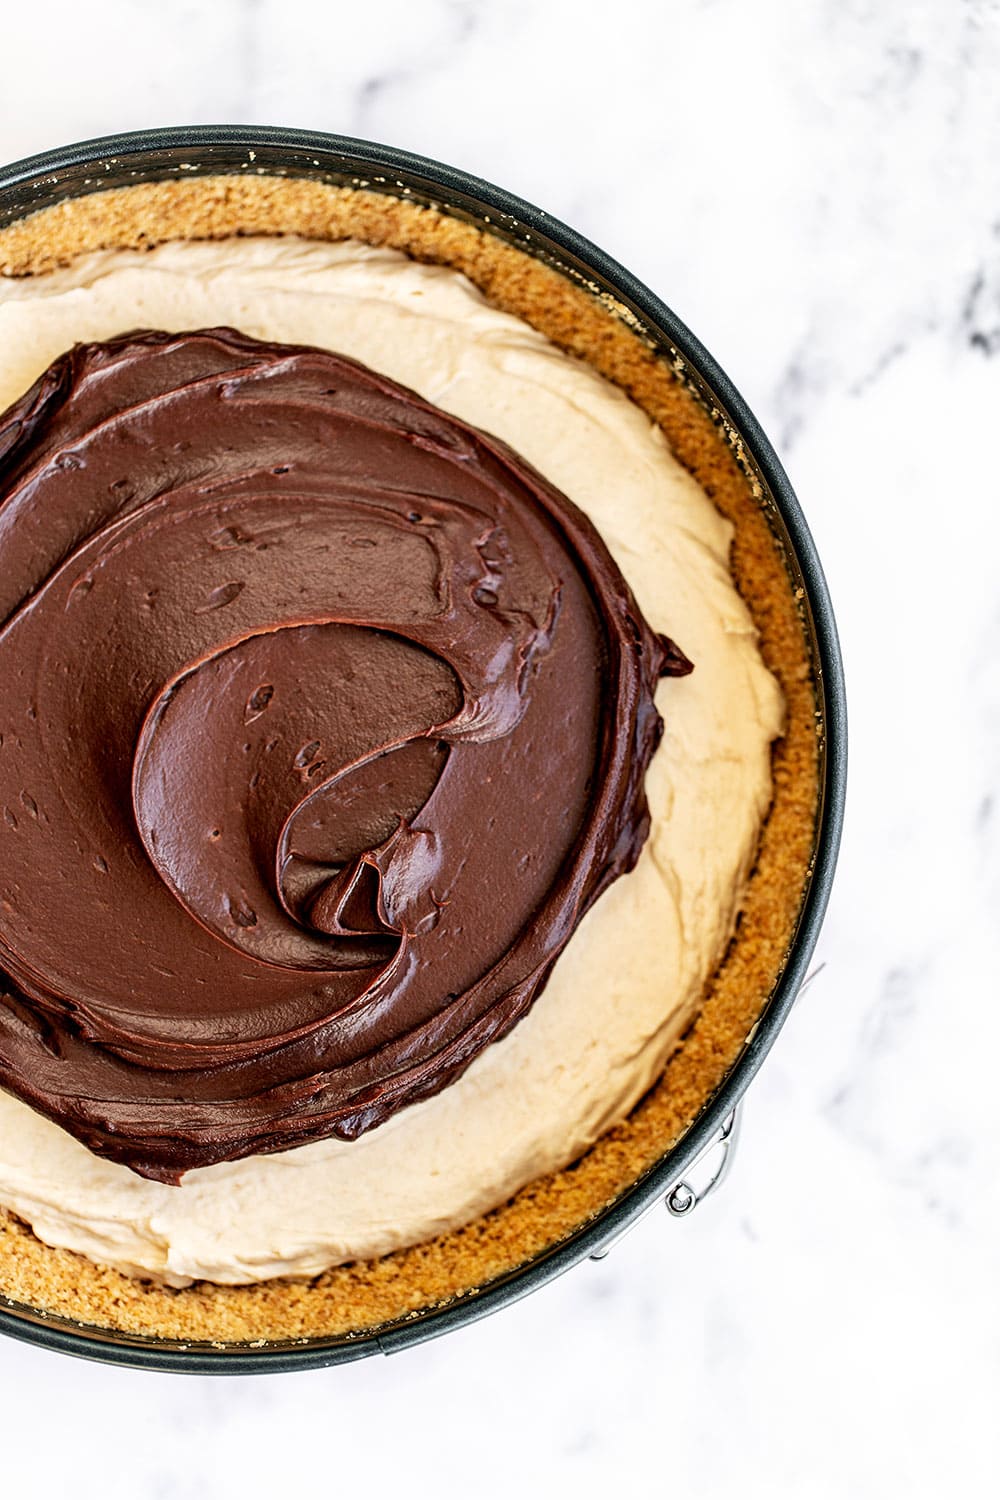 Top of entire cheesecake with chocolate ganache spread over